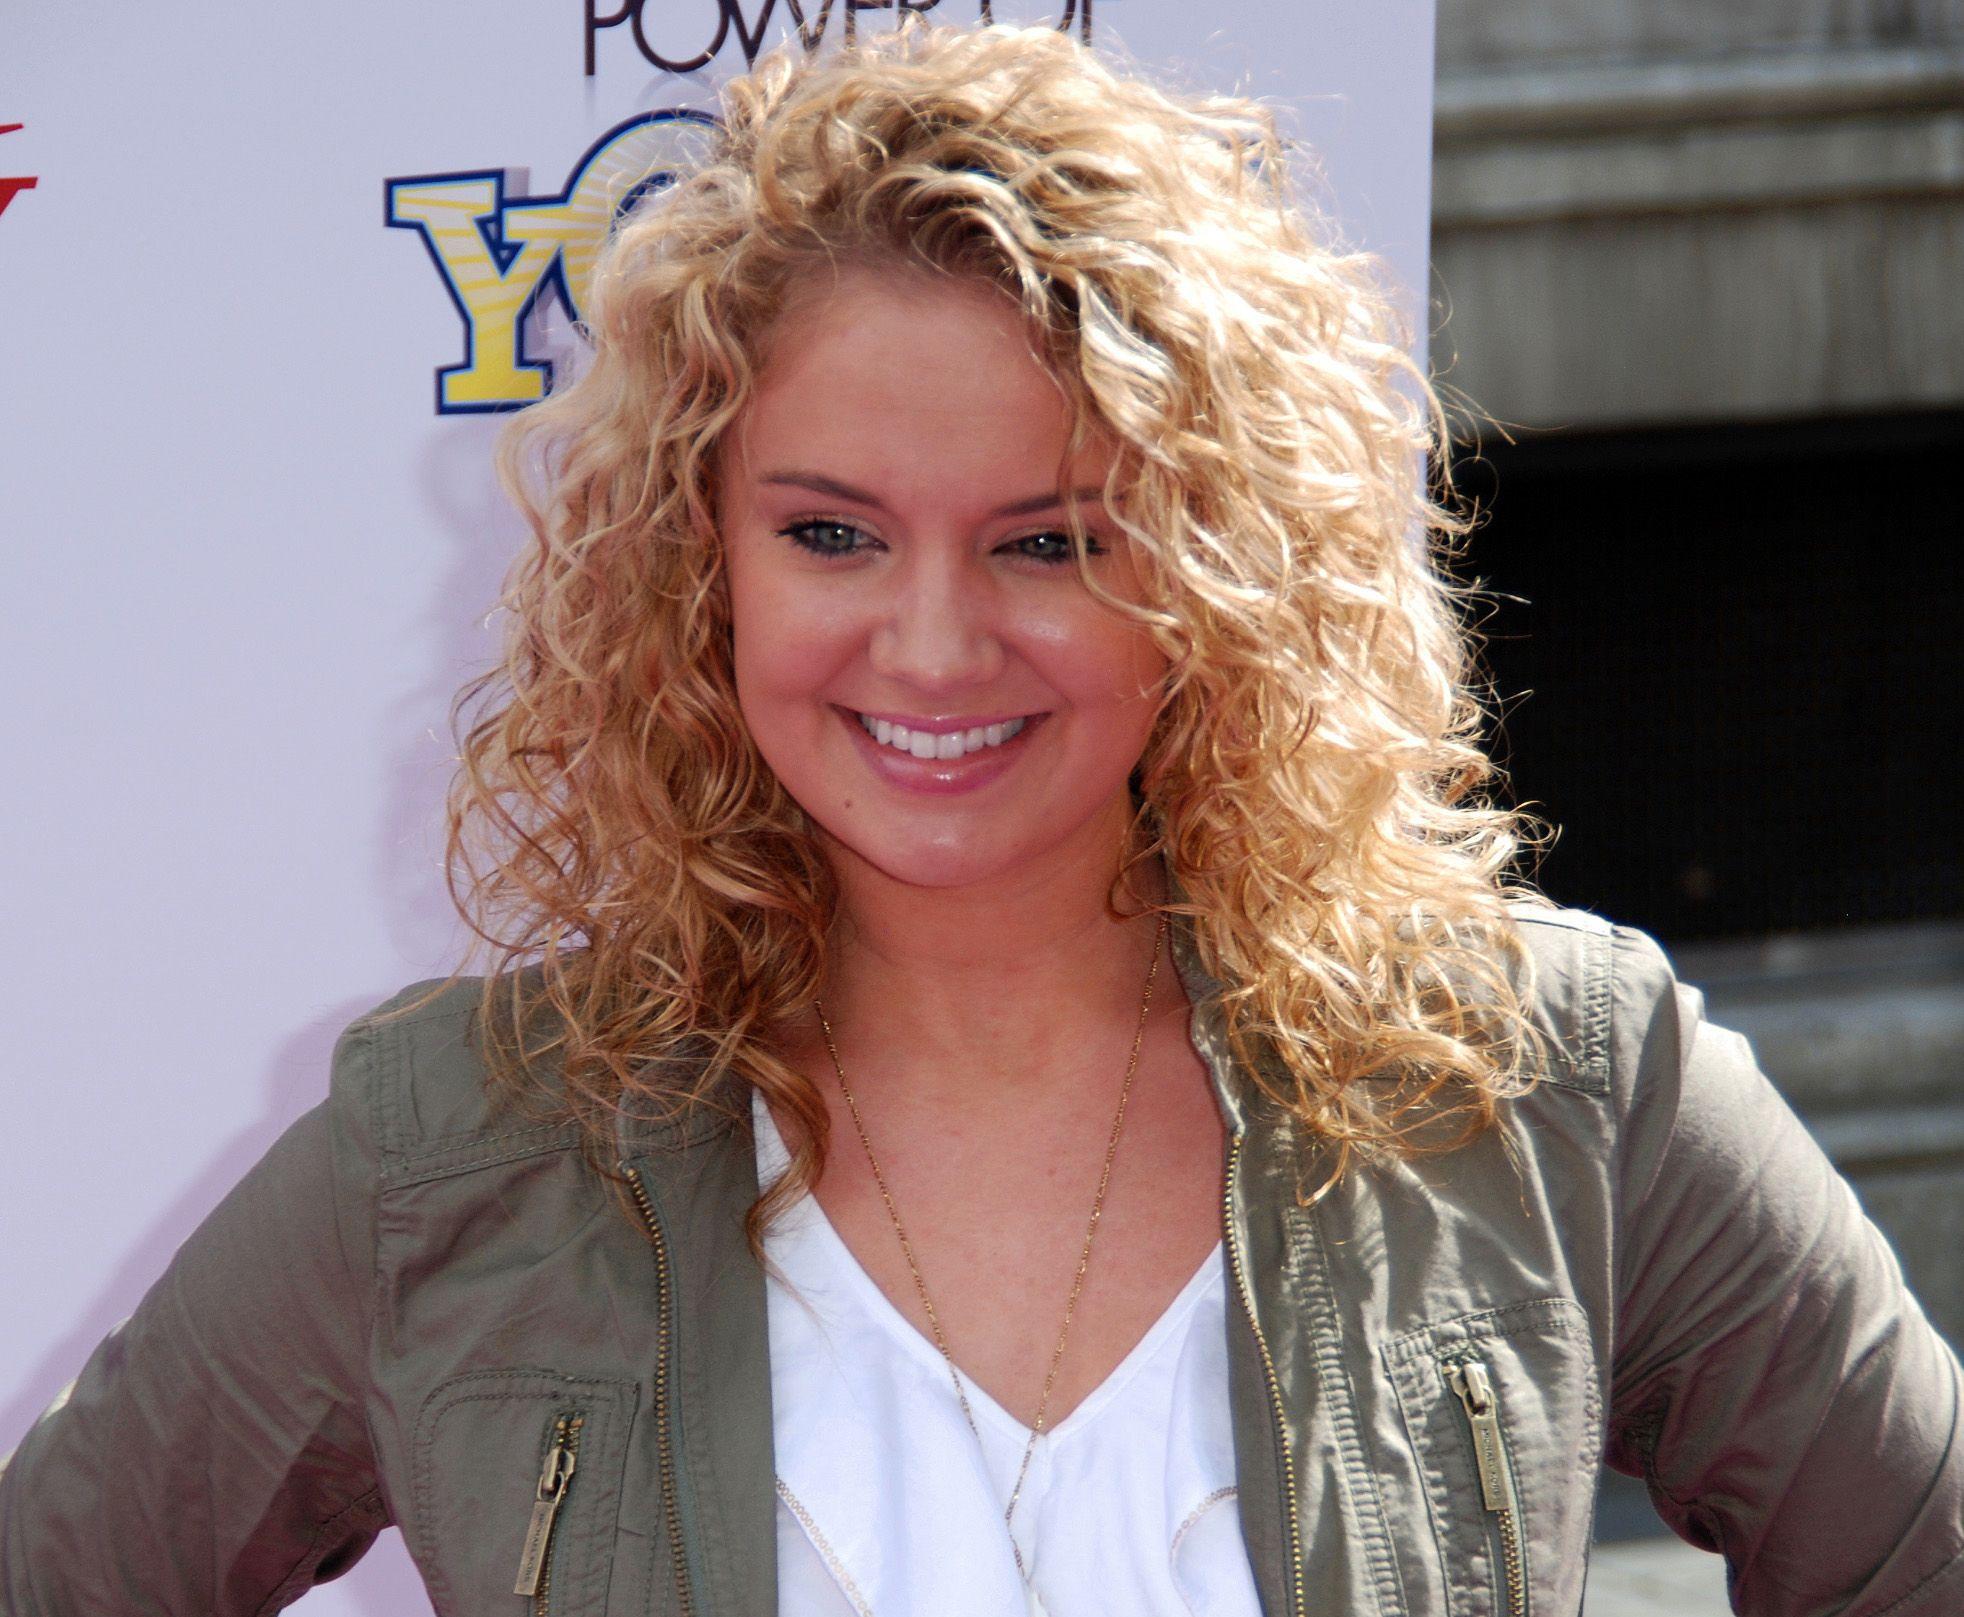 Tiffany Thornton Age, Bra Size, Height, Weight, Body Measurements